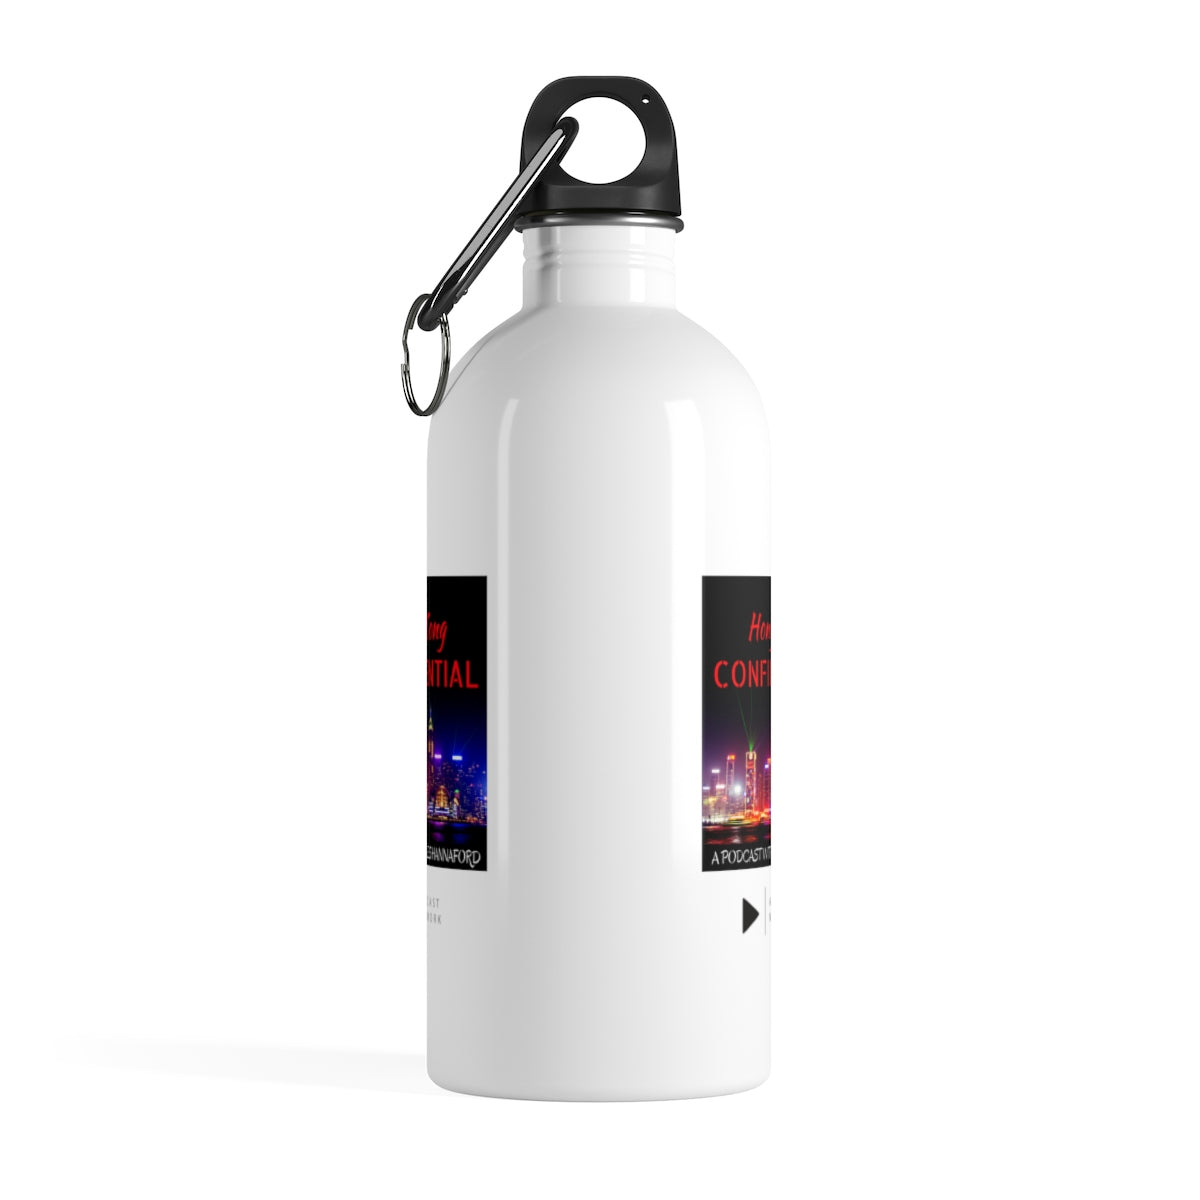 Hong Kong Confidential Stainless Steel Water Bottle